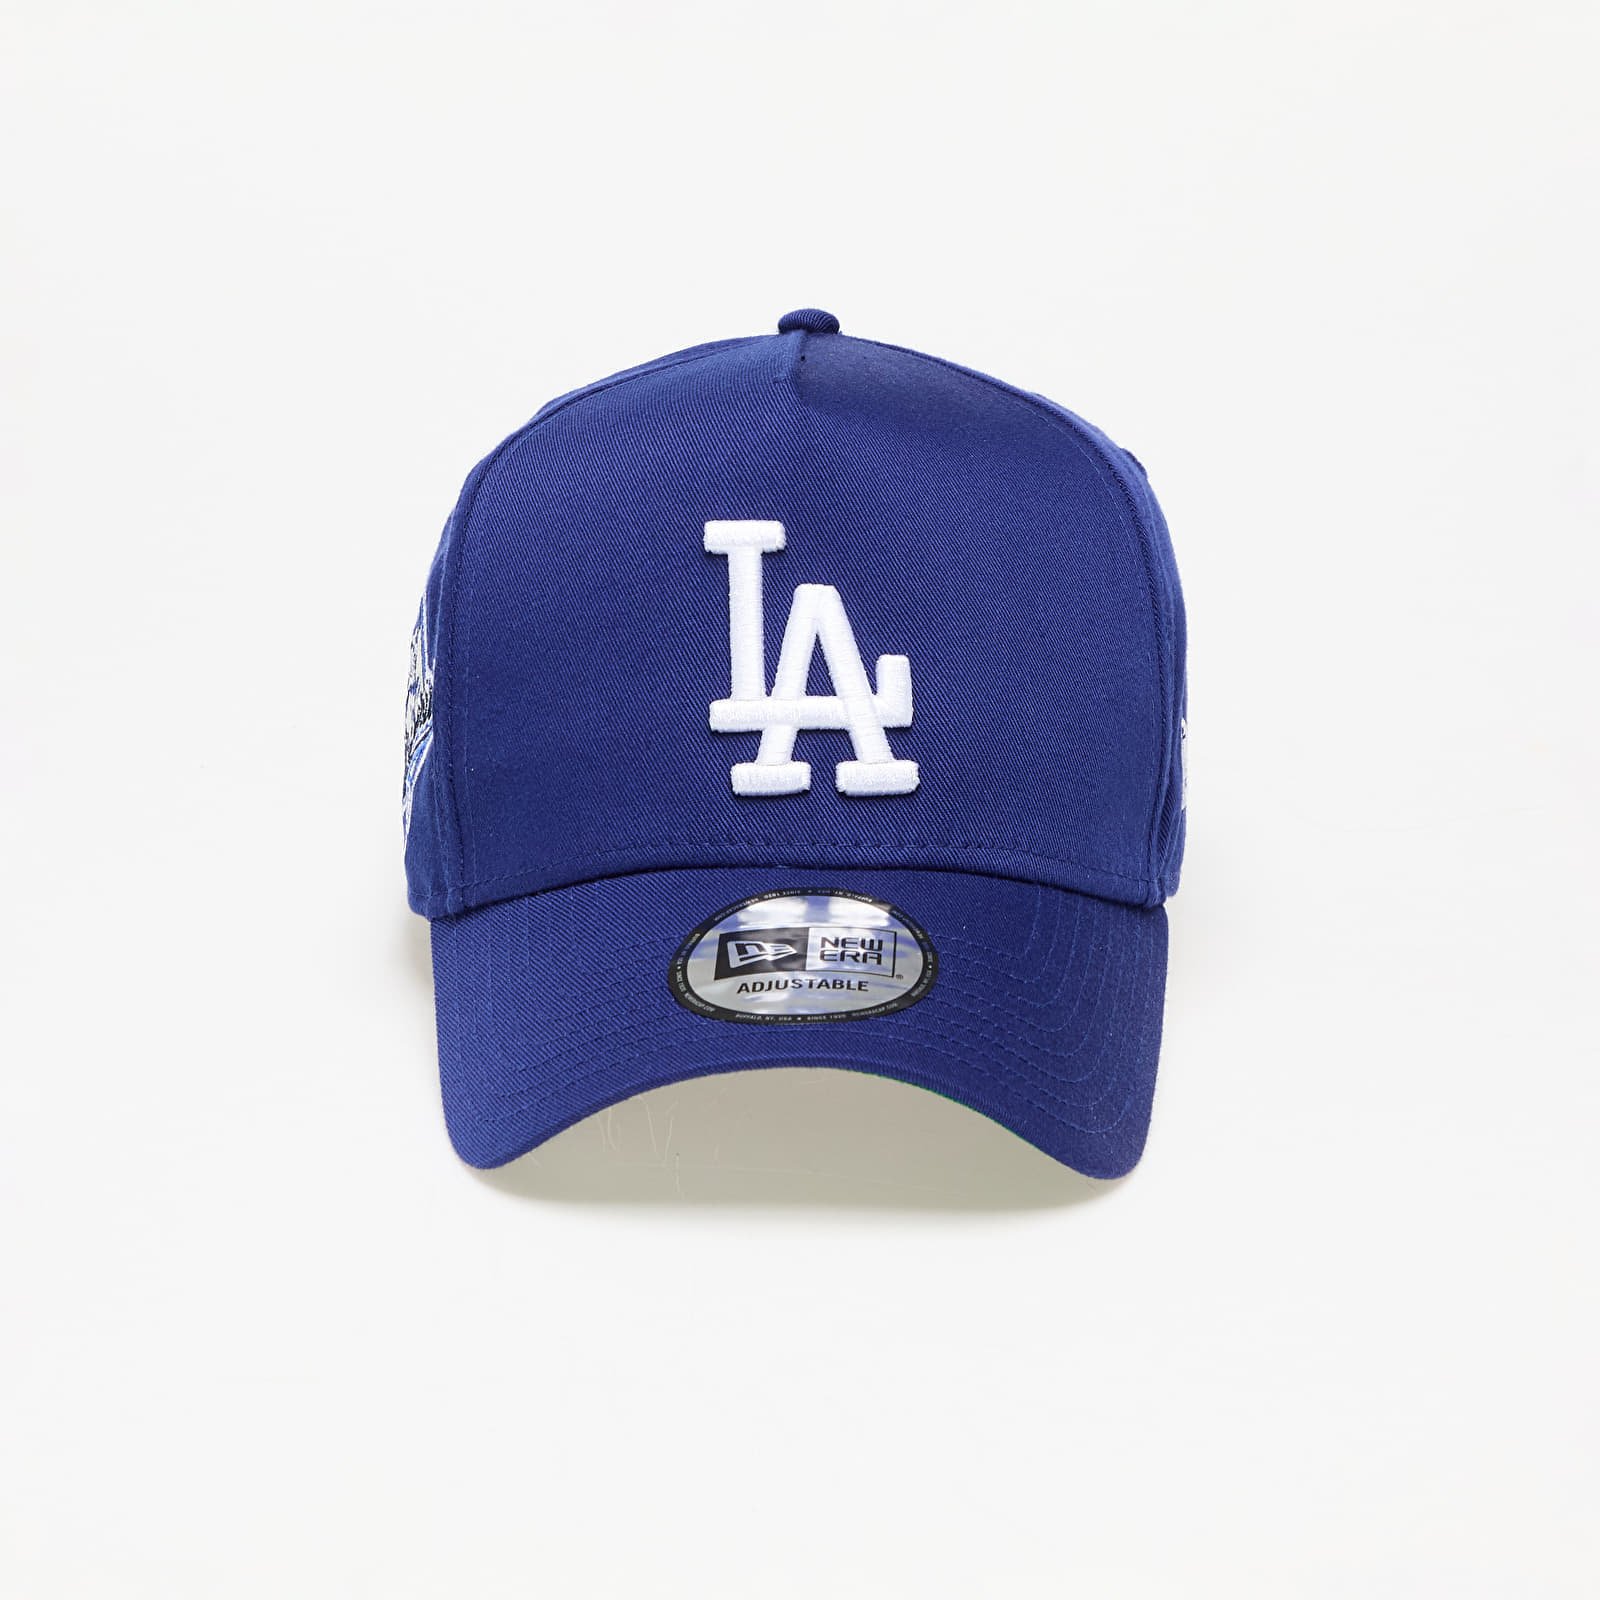 Los Angeles Dodgers World Series Patch 9FORTY E-Frame Adjustable Cap